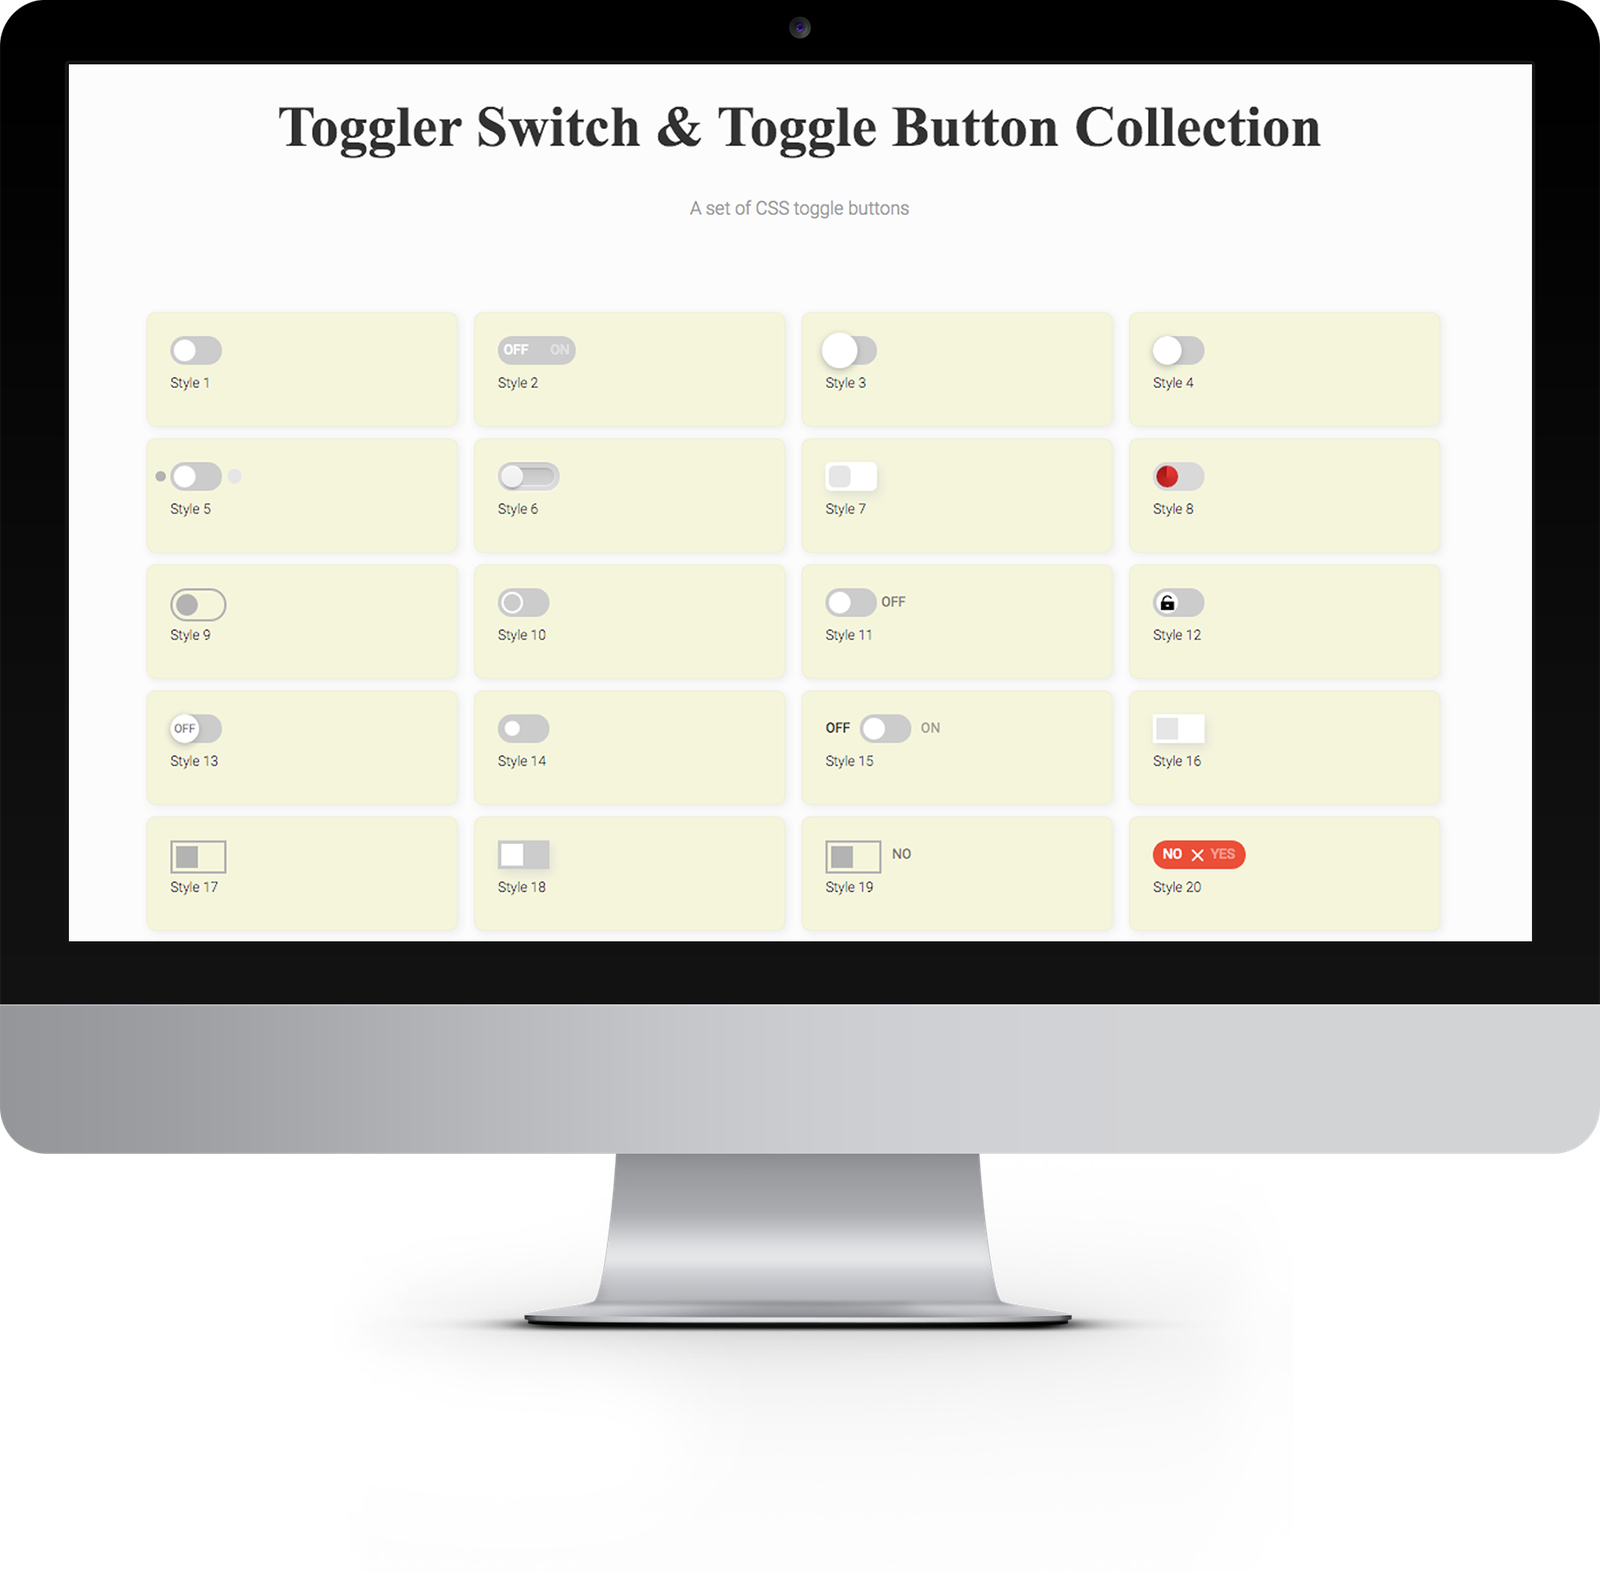 Toggler Toggle & Switch Buttons